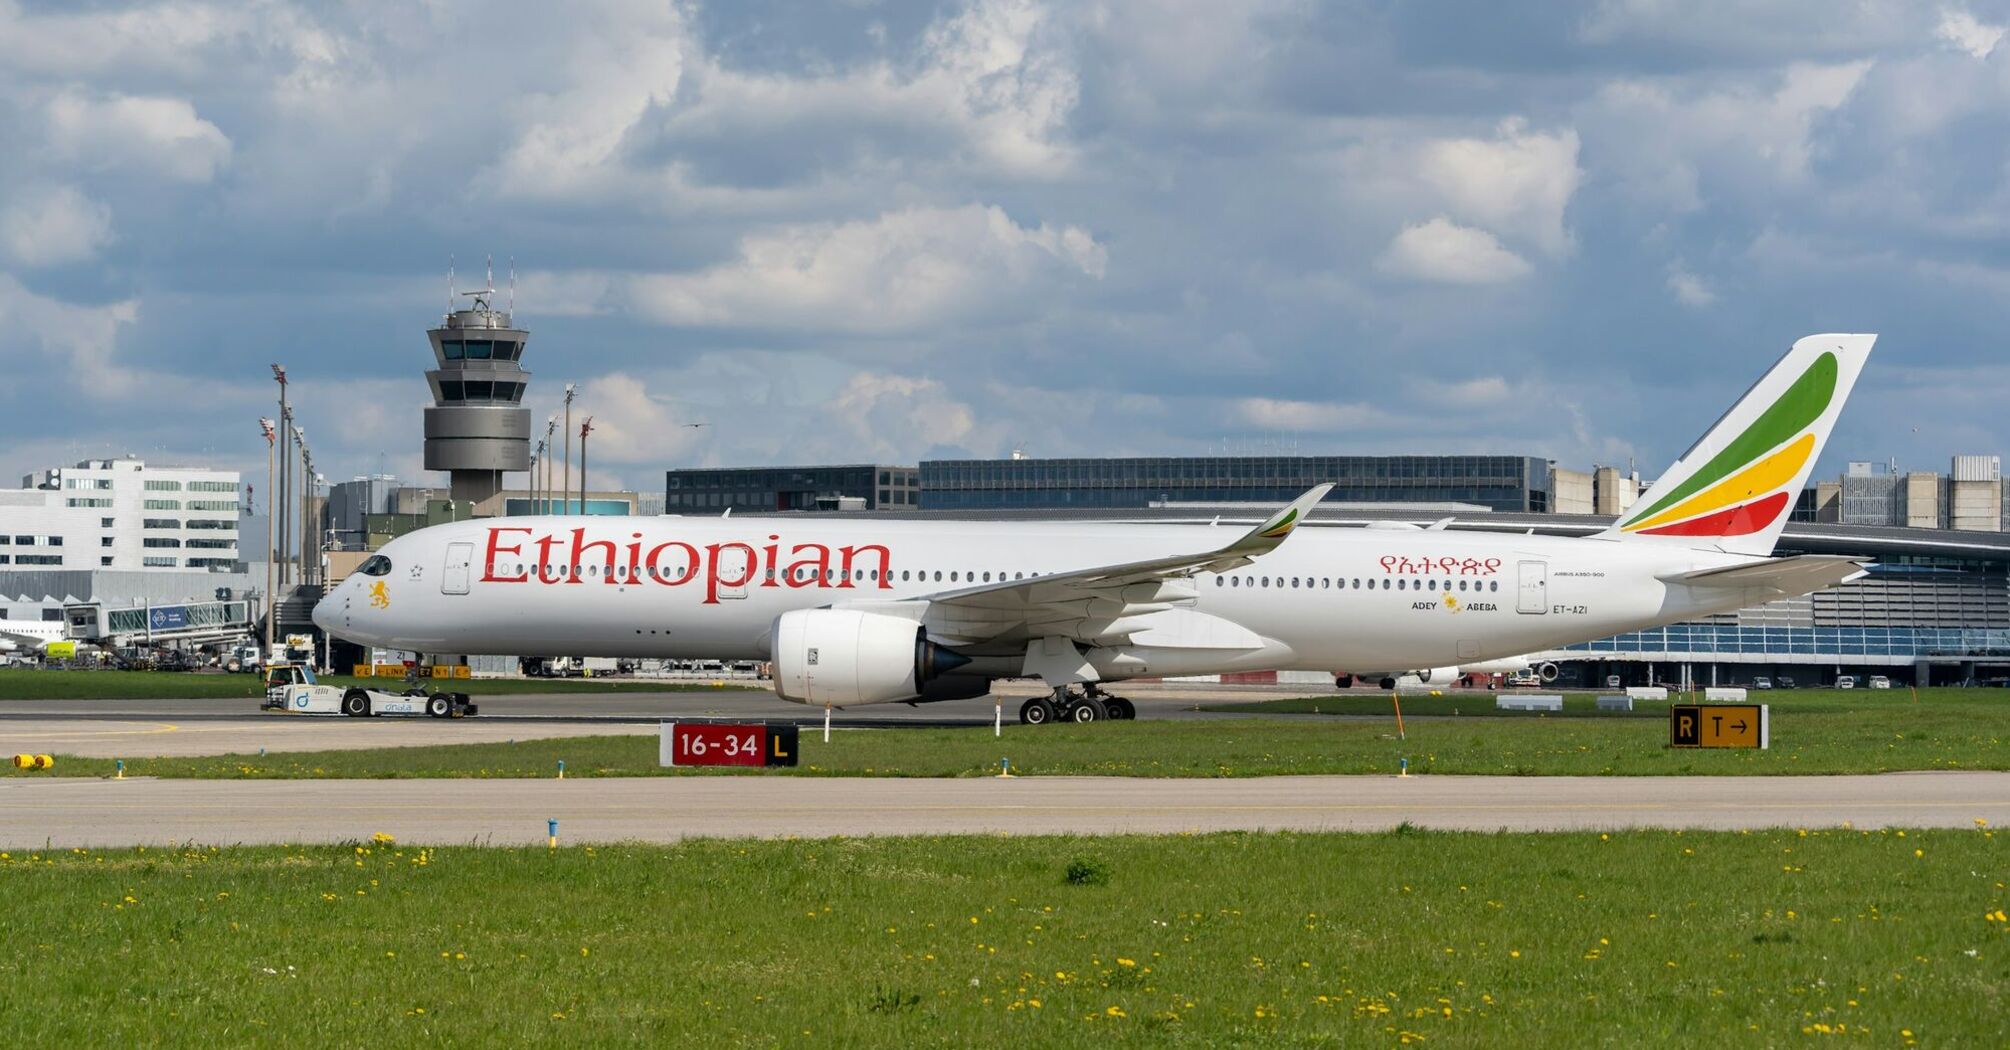 Ethiopian Airlines aircraft at an airport